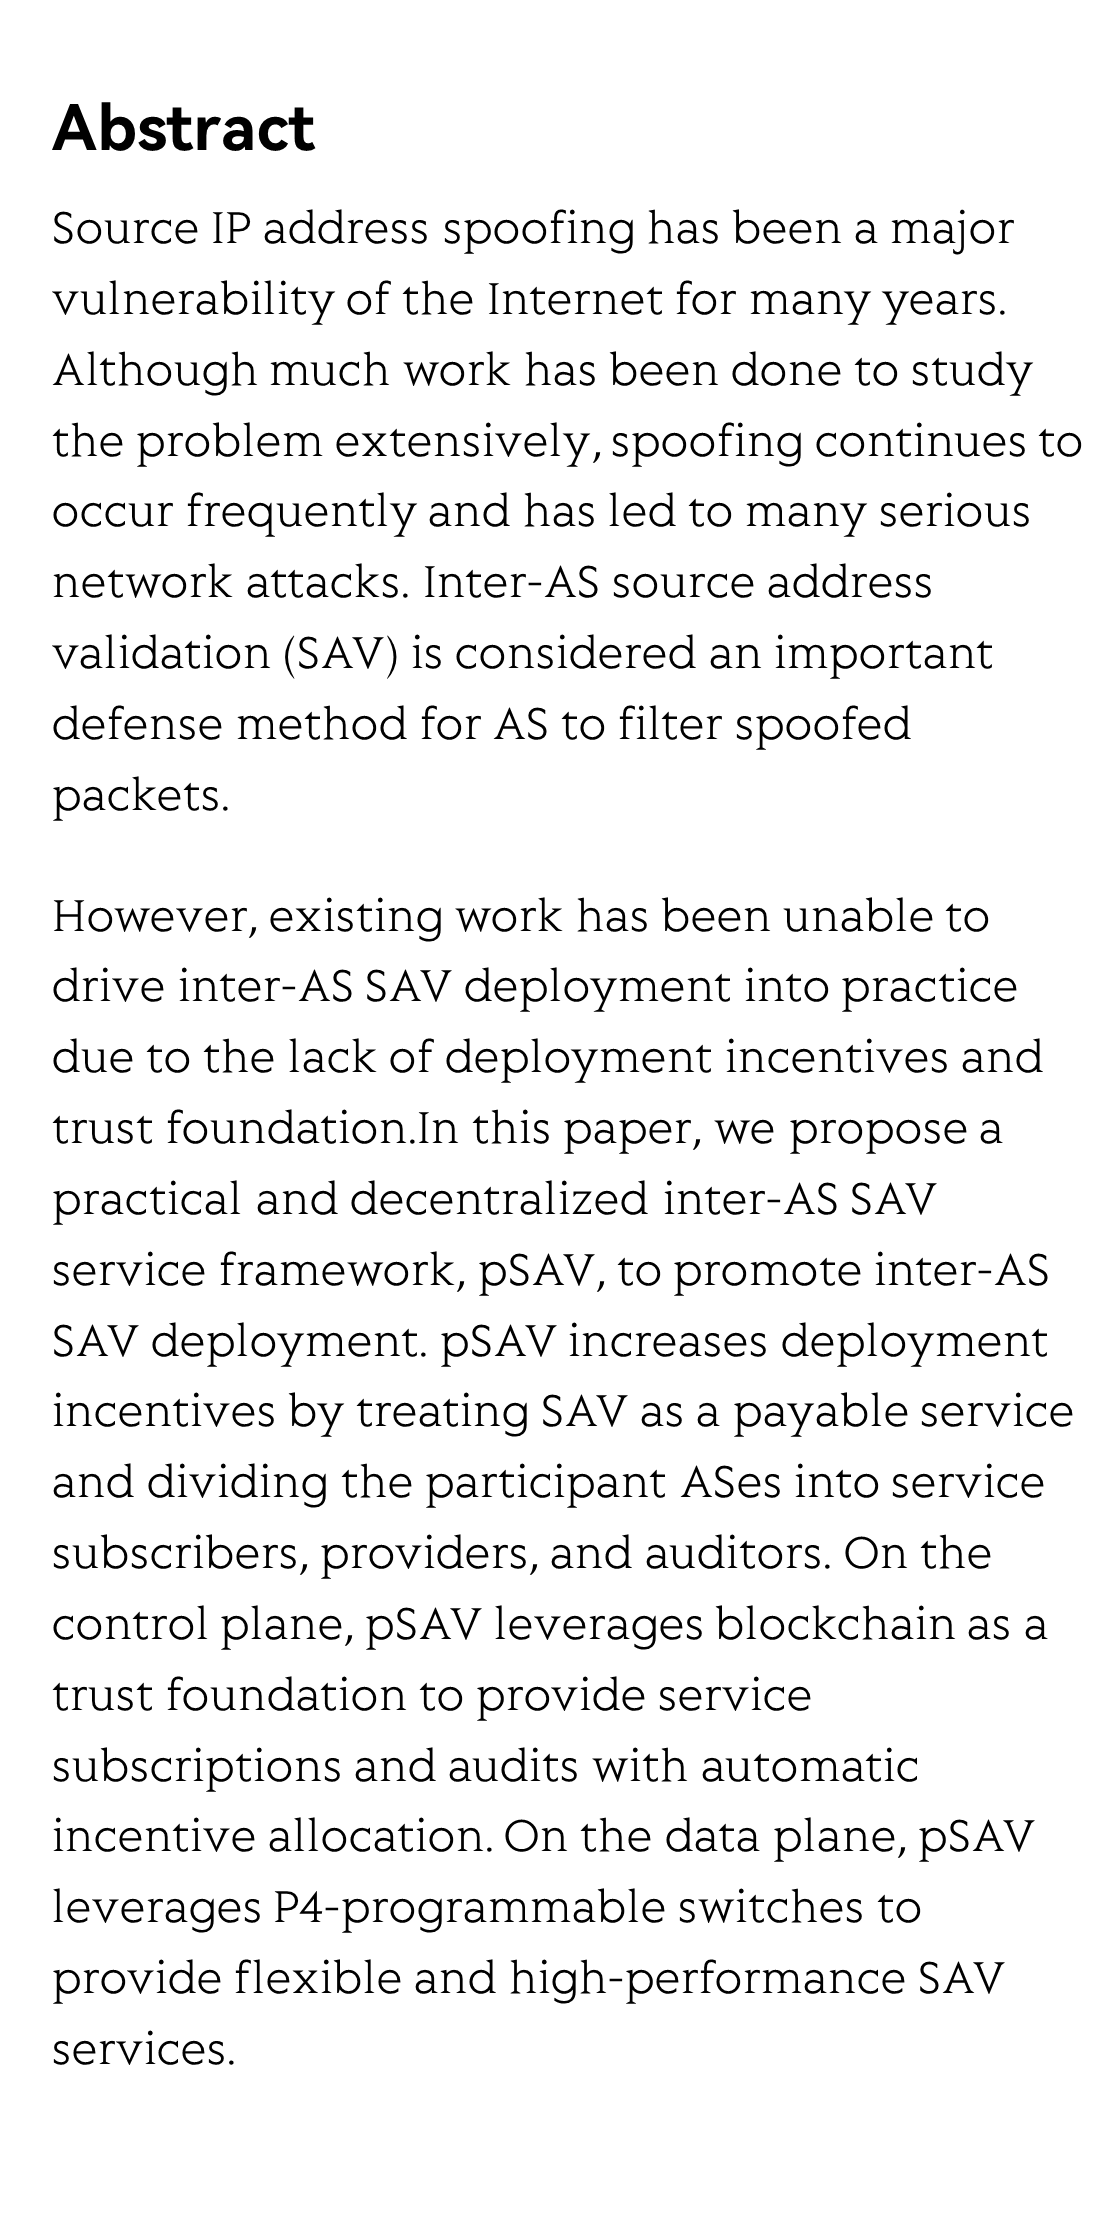 pSAV: A Practical and Decentralized Inter-AS Source Address Validation_2